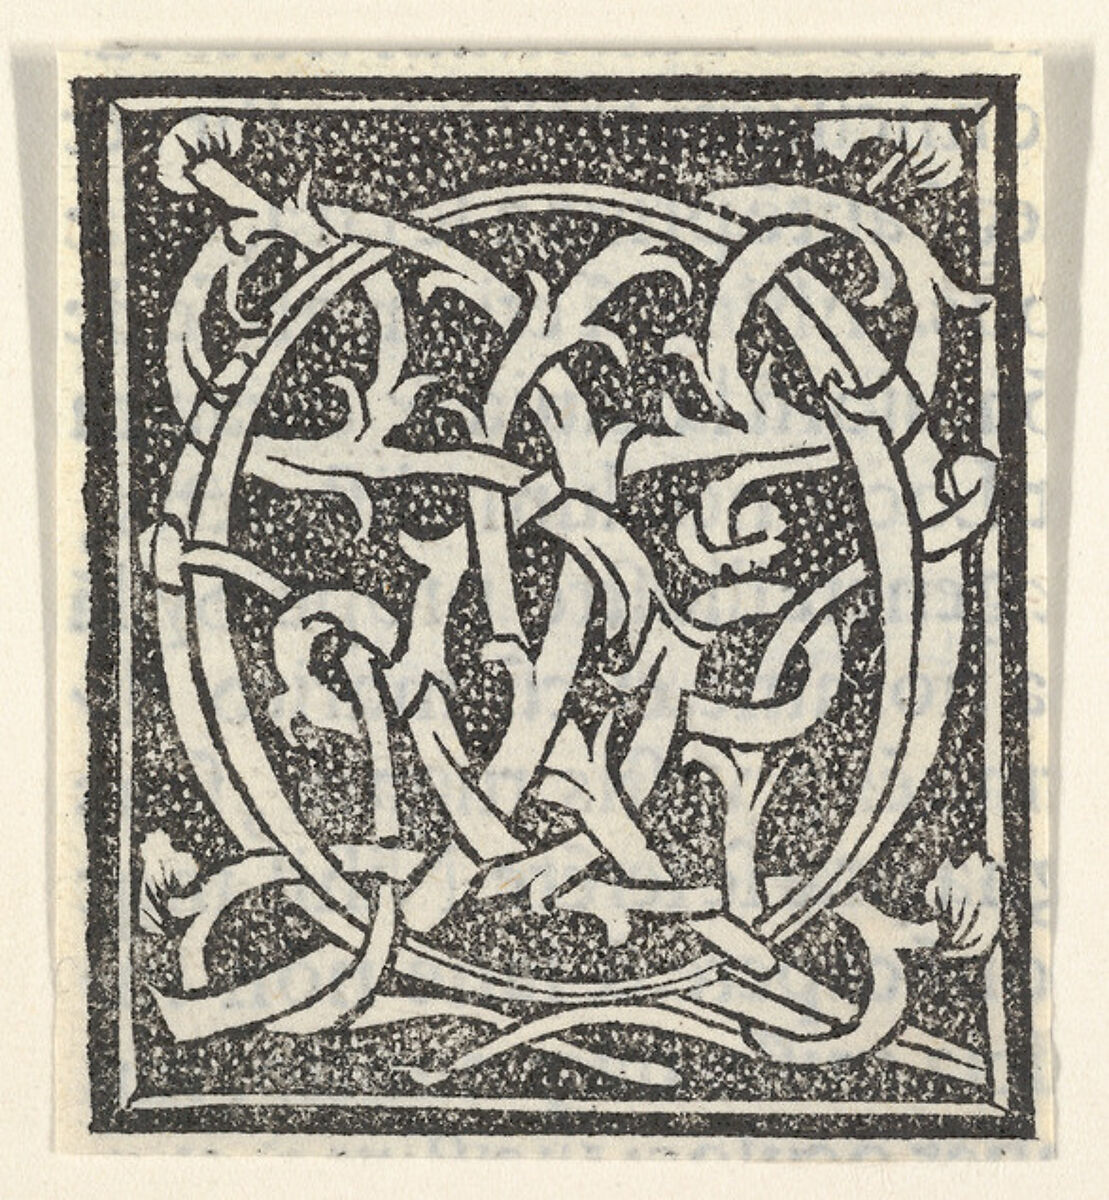 Initial letter Q on patterned background, Anonymous, Italian, 16th century, Woodcut, criblé ground 